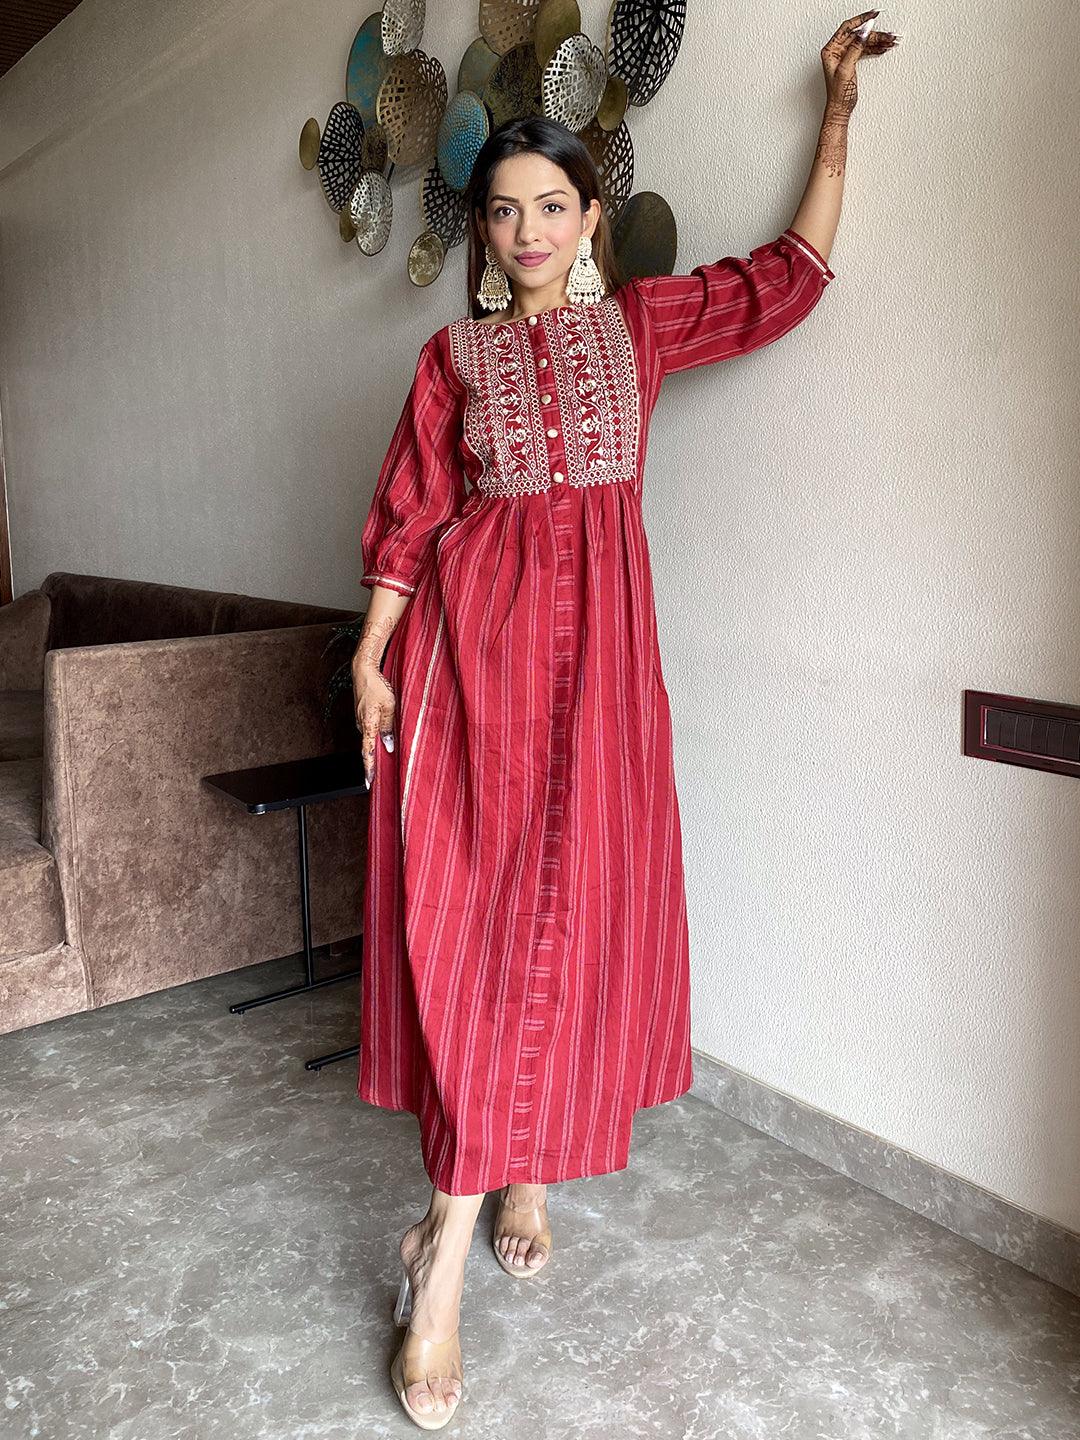 Maroon Embroidered Cotton Dress - Libas